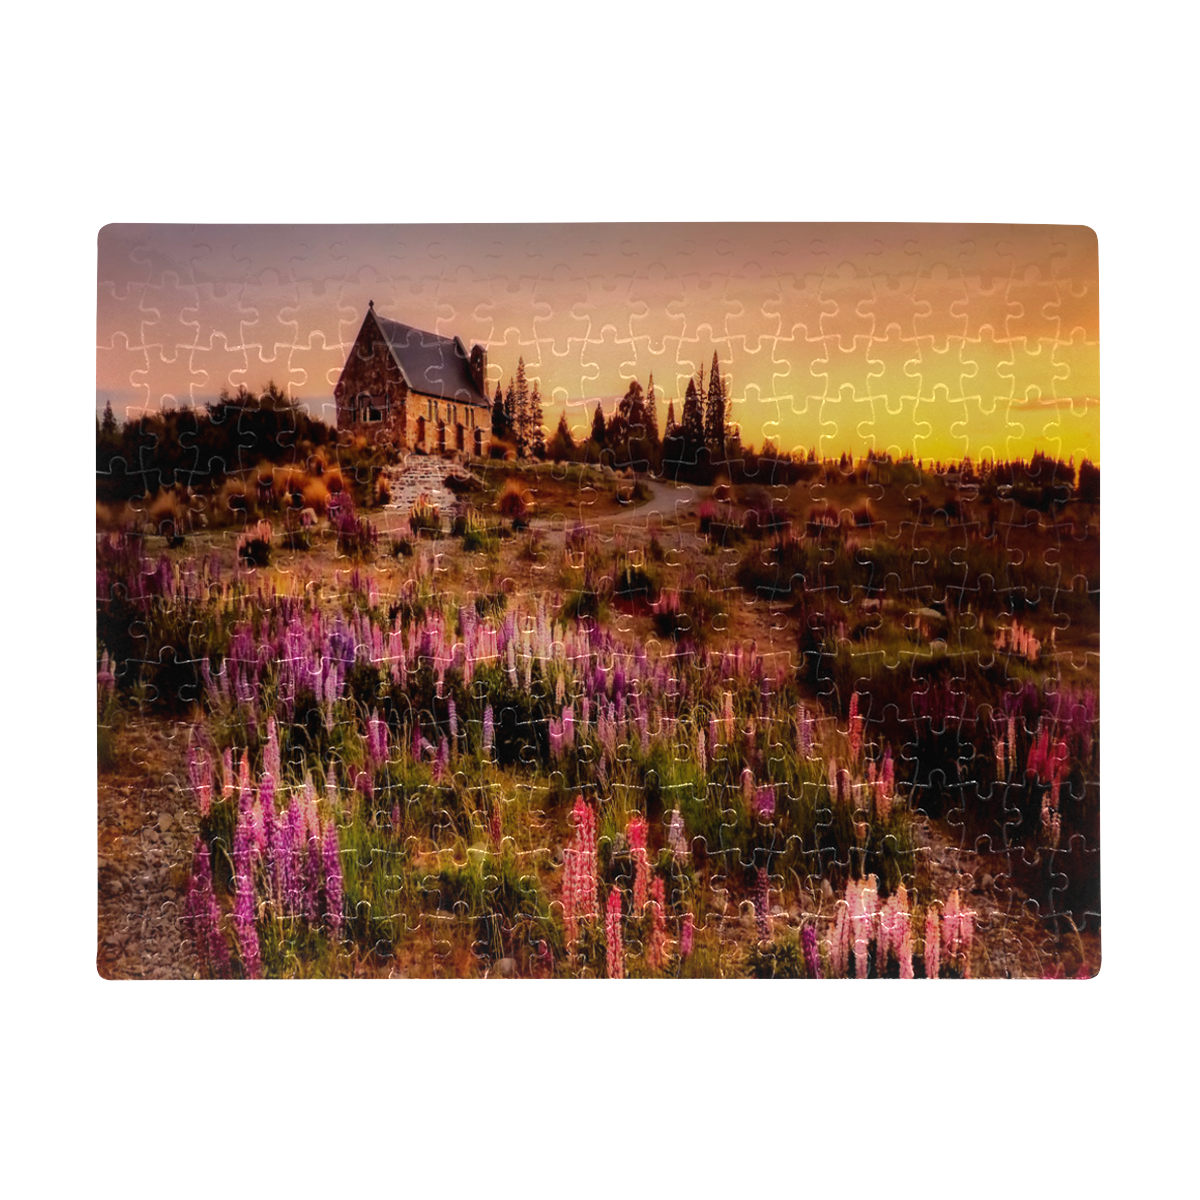 New Zealand Church A3 Size Jigsaw Puzzle (Set of 252 Pieces)